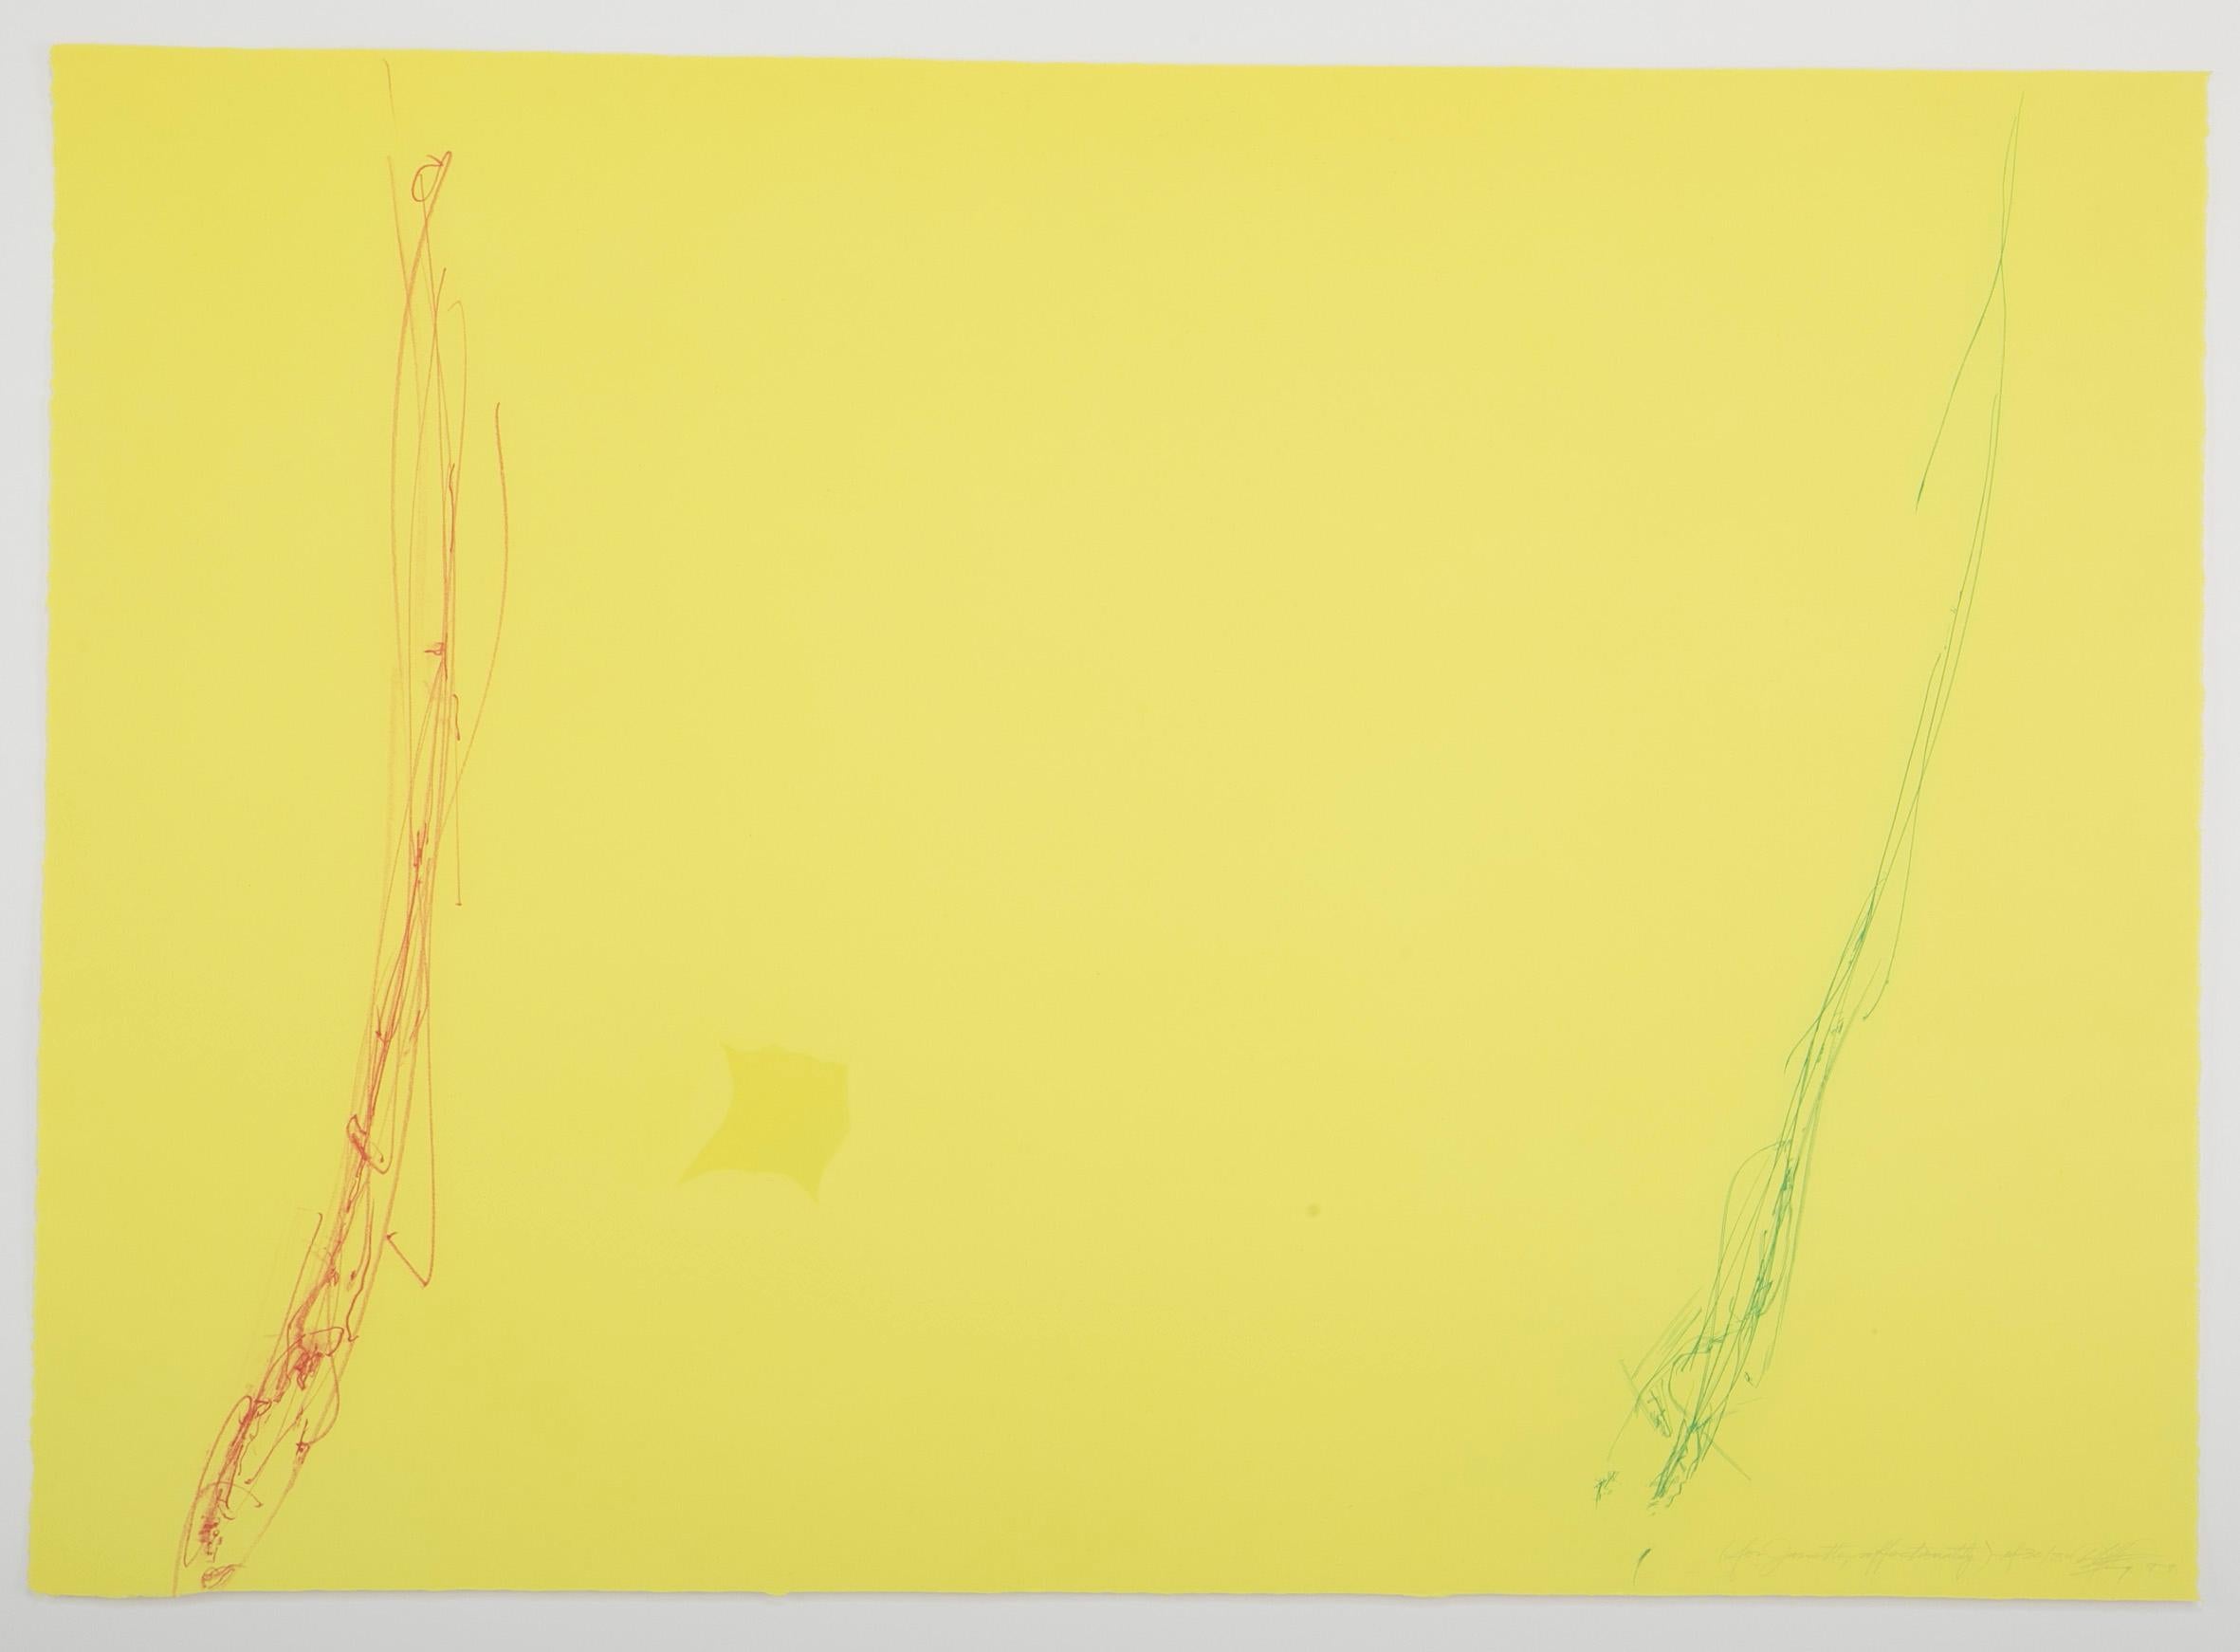 A Dan Flavin aquatint and etching in colors. Titled, signed and dated # 30/30 - 1988. Measures: Sheet 22 1/4 in. × 31 3/16 in.